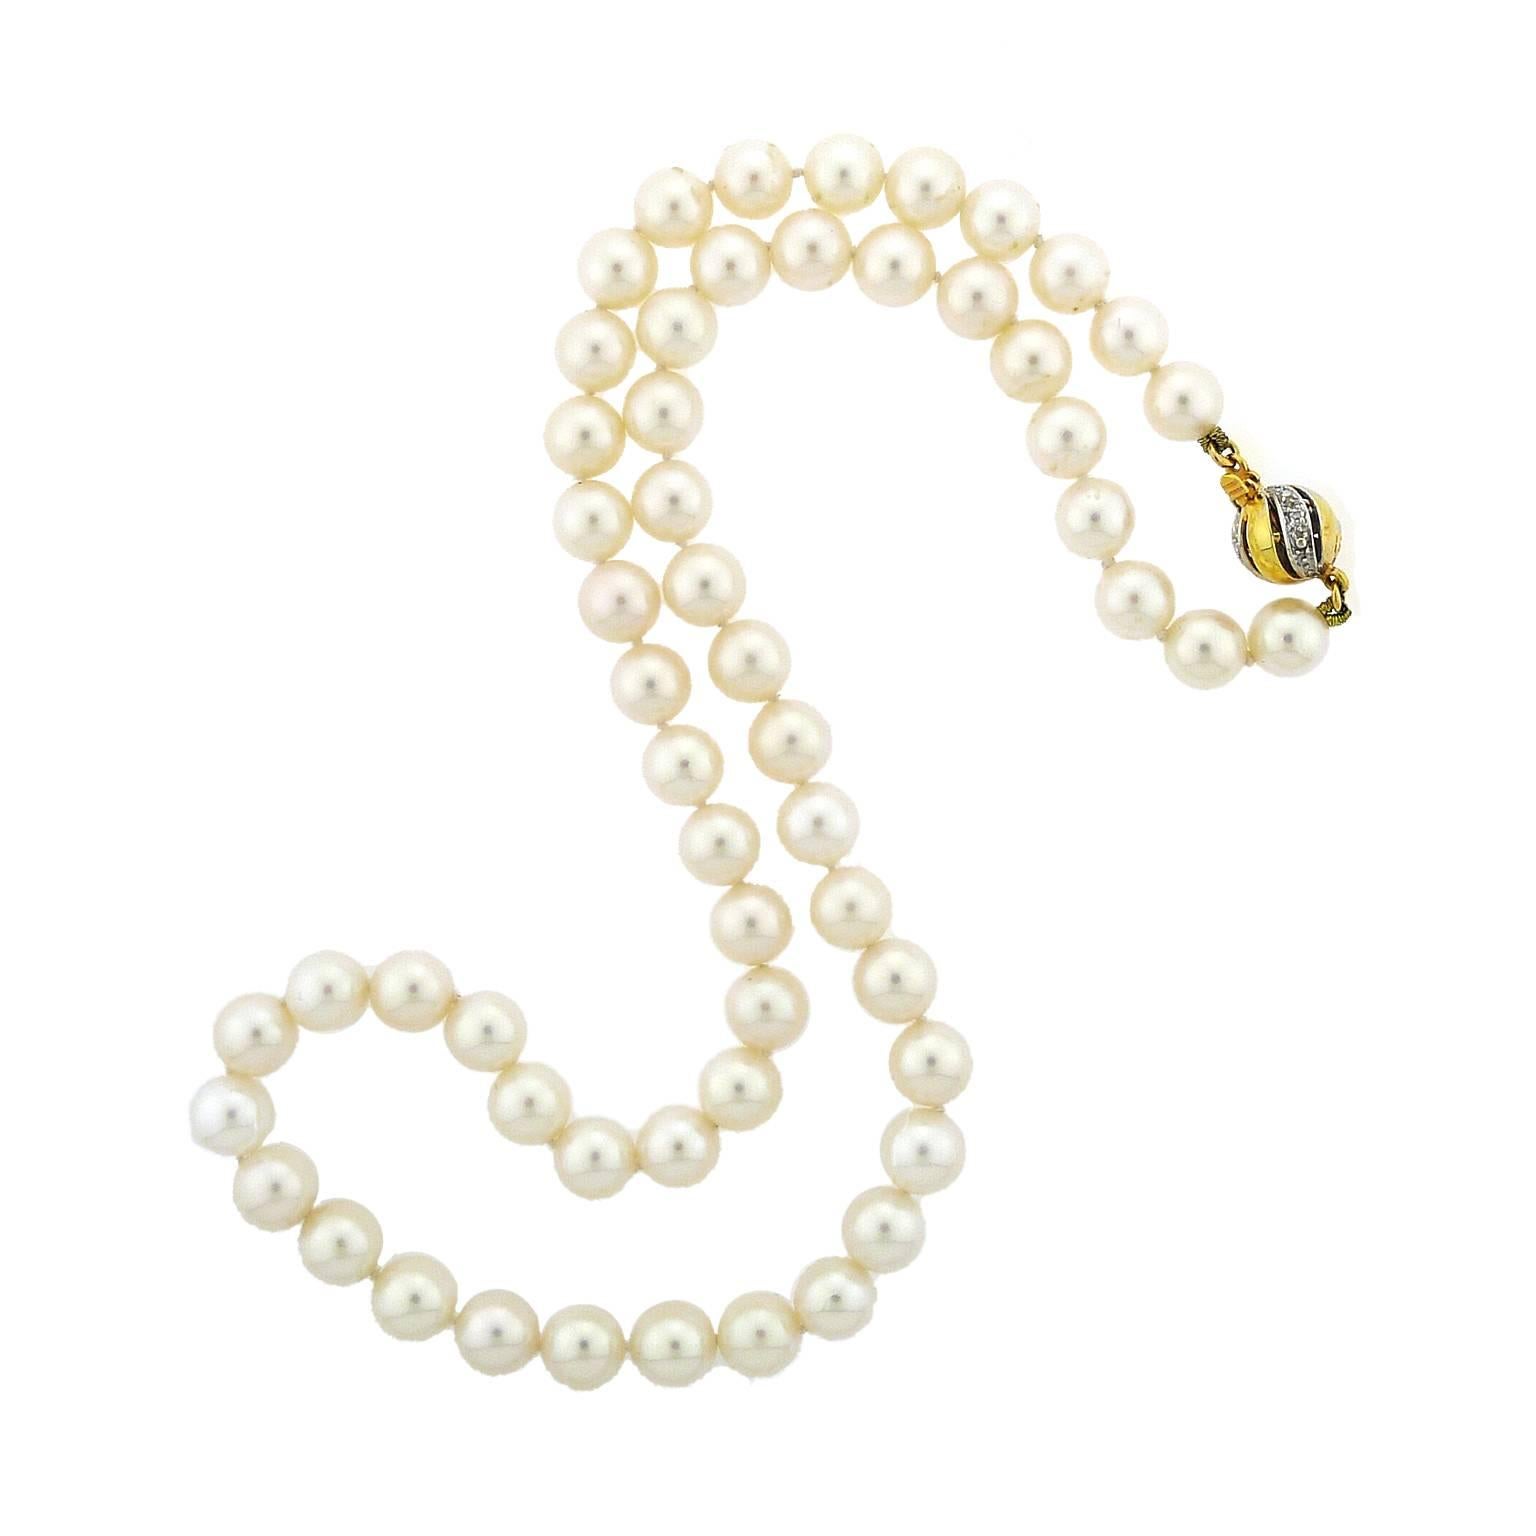 57 pearls measure from 6.93 millimeter to 7.37 millimeter. Luster is excellent, color is creamy white, there are occasional surface spots that are difficult to see.
Clasp is 14k yellow and white gold with small pave diamonds. Strand measures 17.5